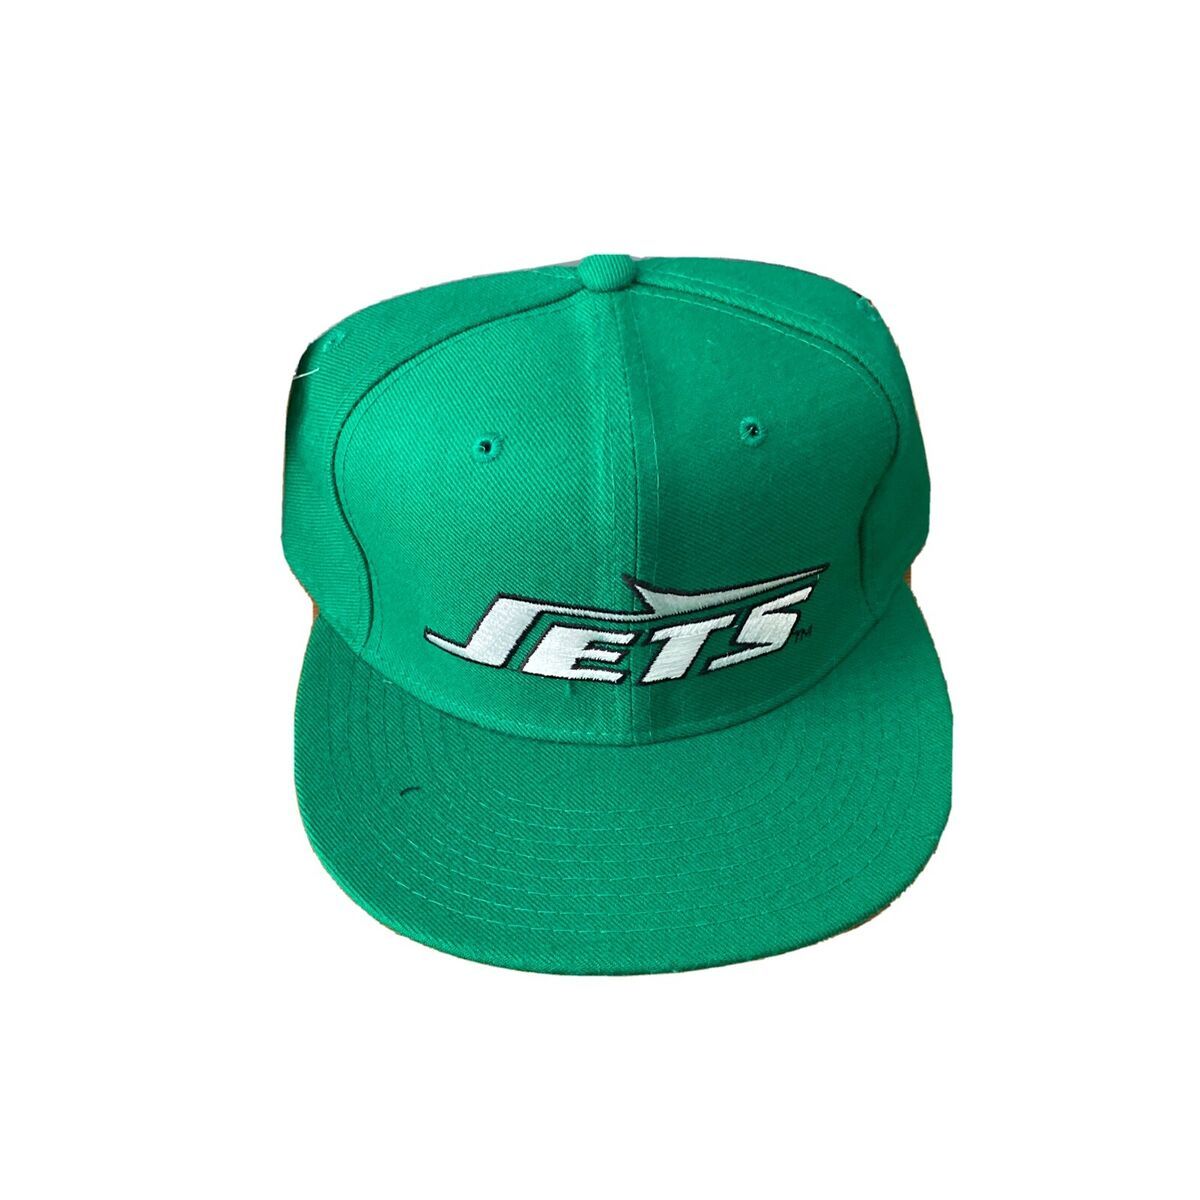 New York Jets Fitted Size 7 New Era Hat. (6/22/22)